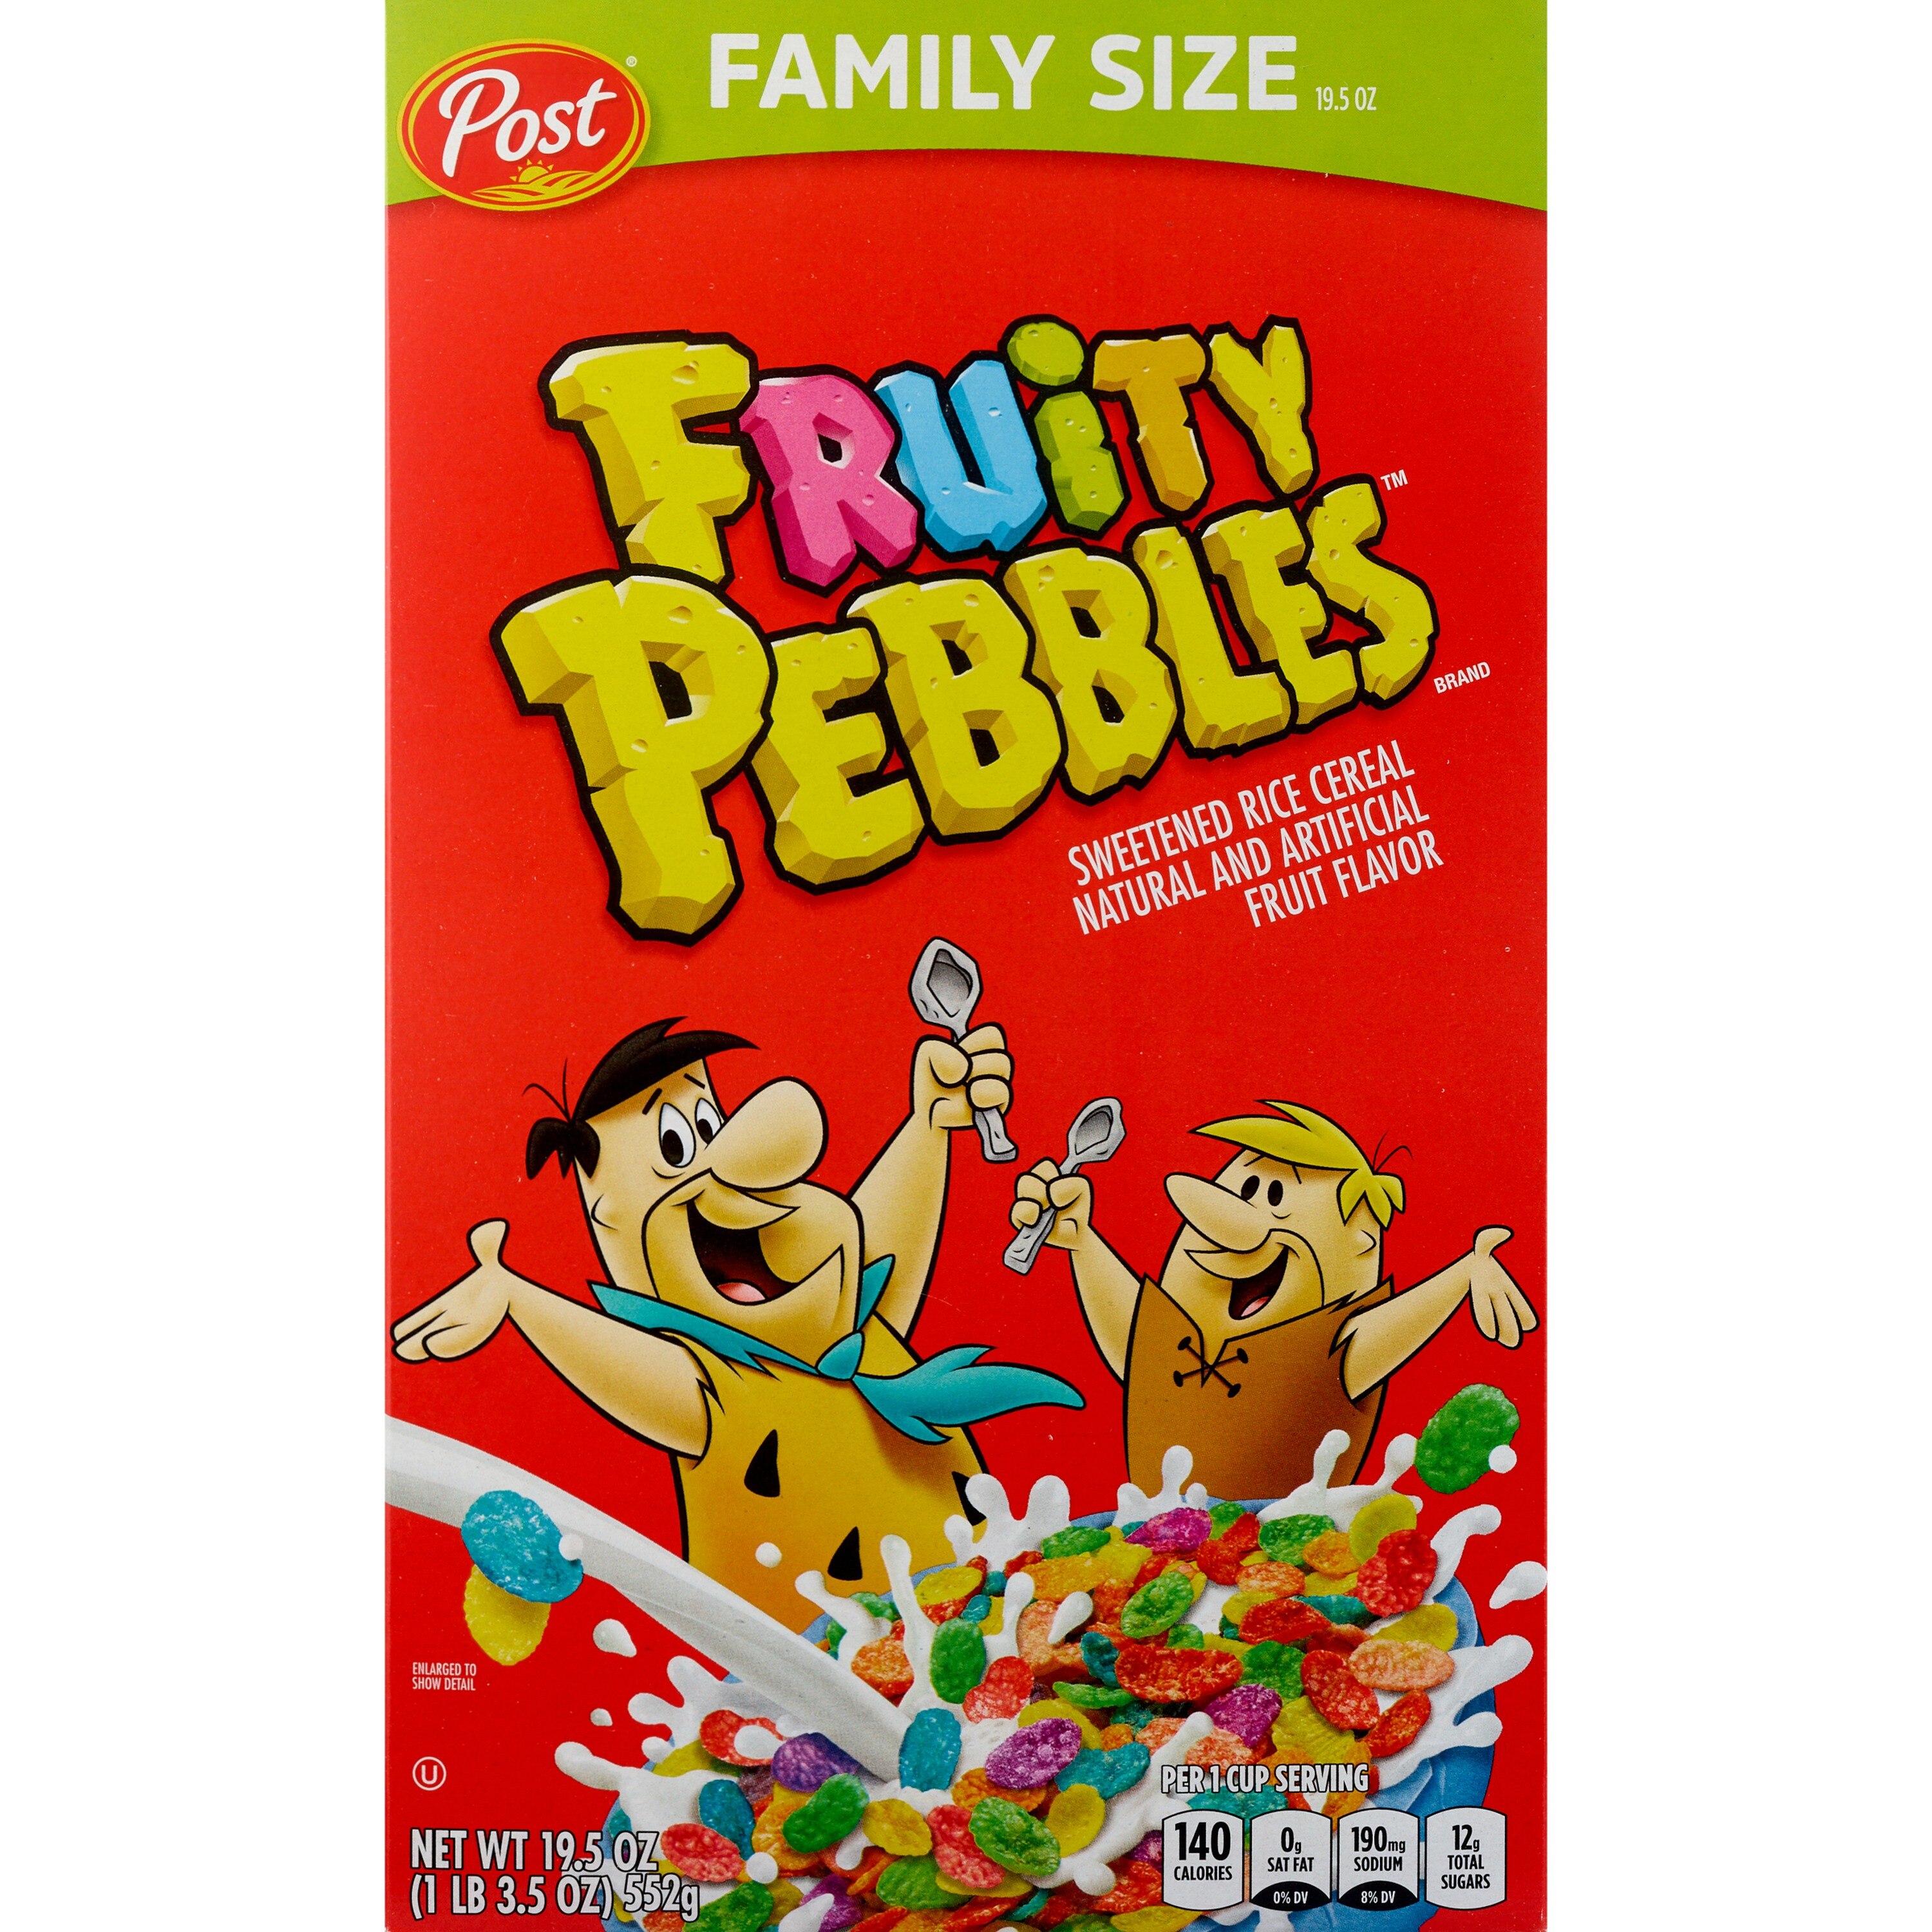 Post Fruity Pebbles Cereal Family Size, 19.5 oz